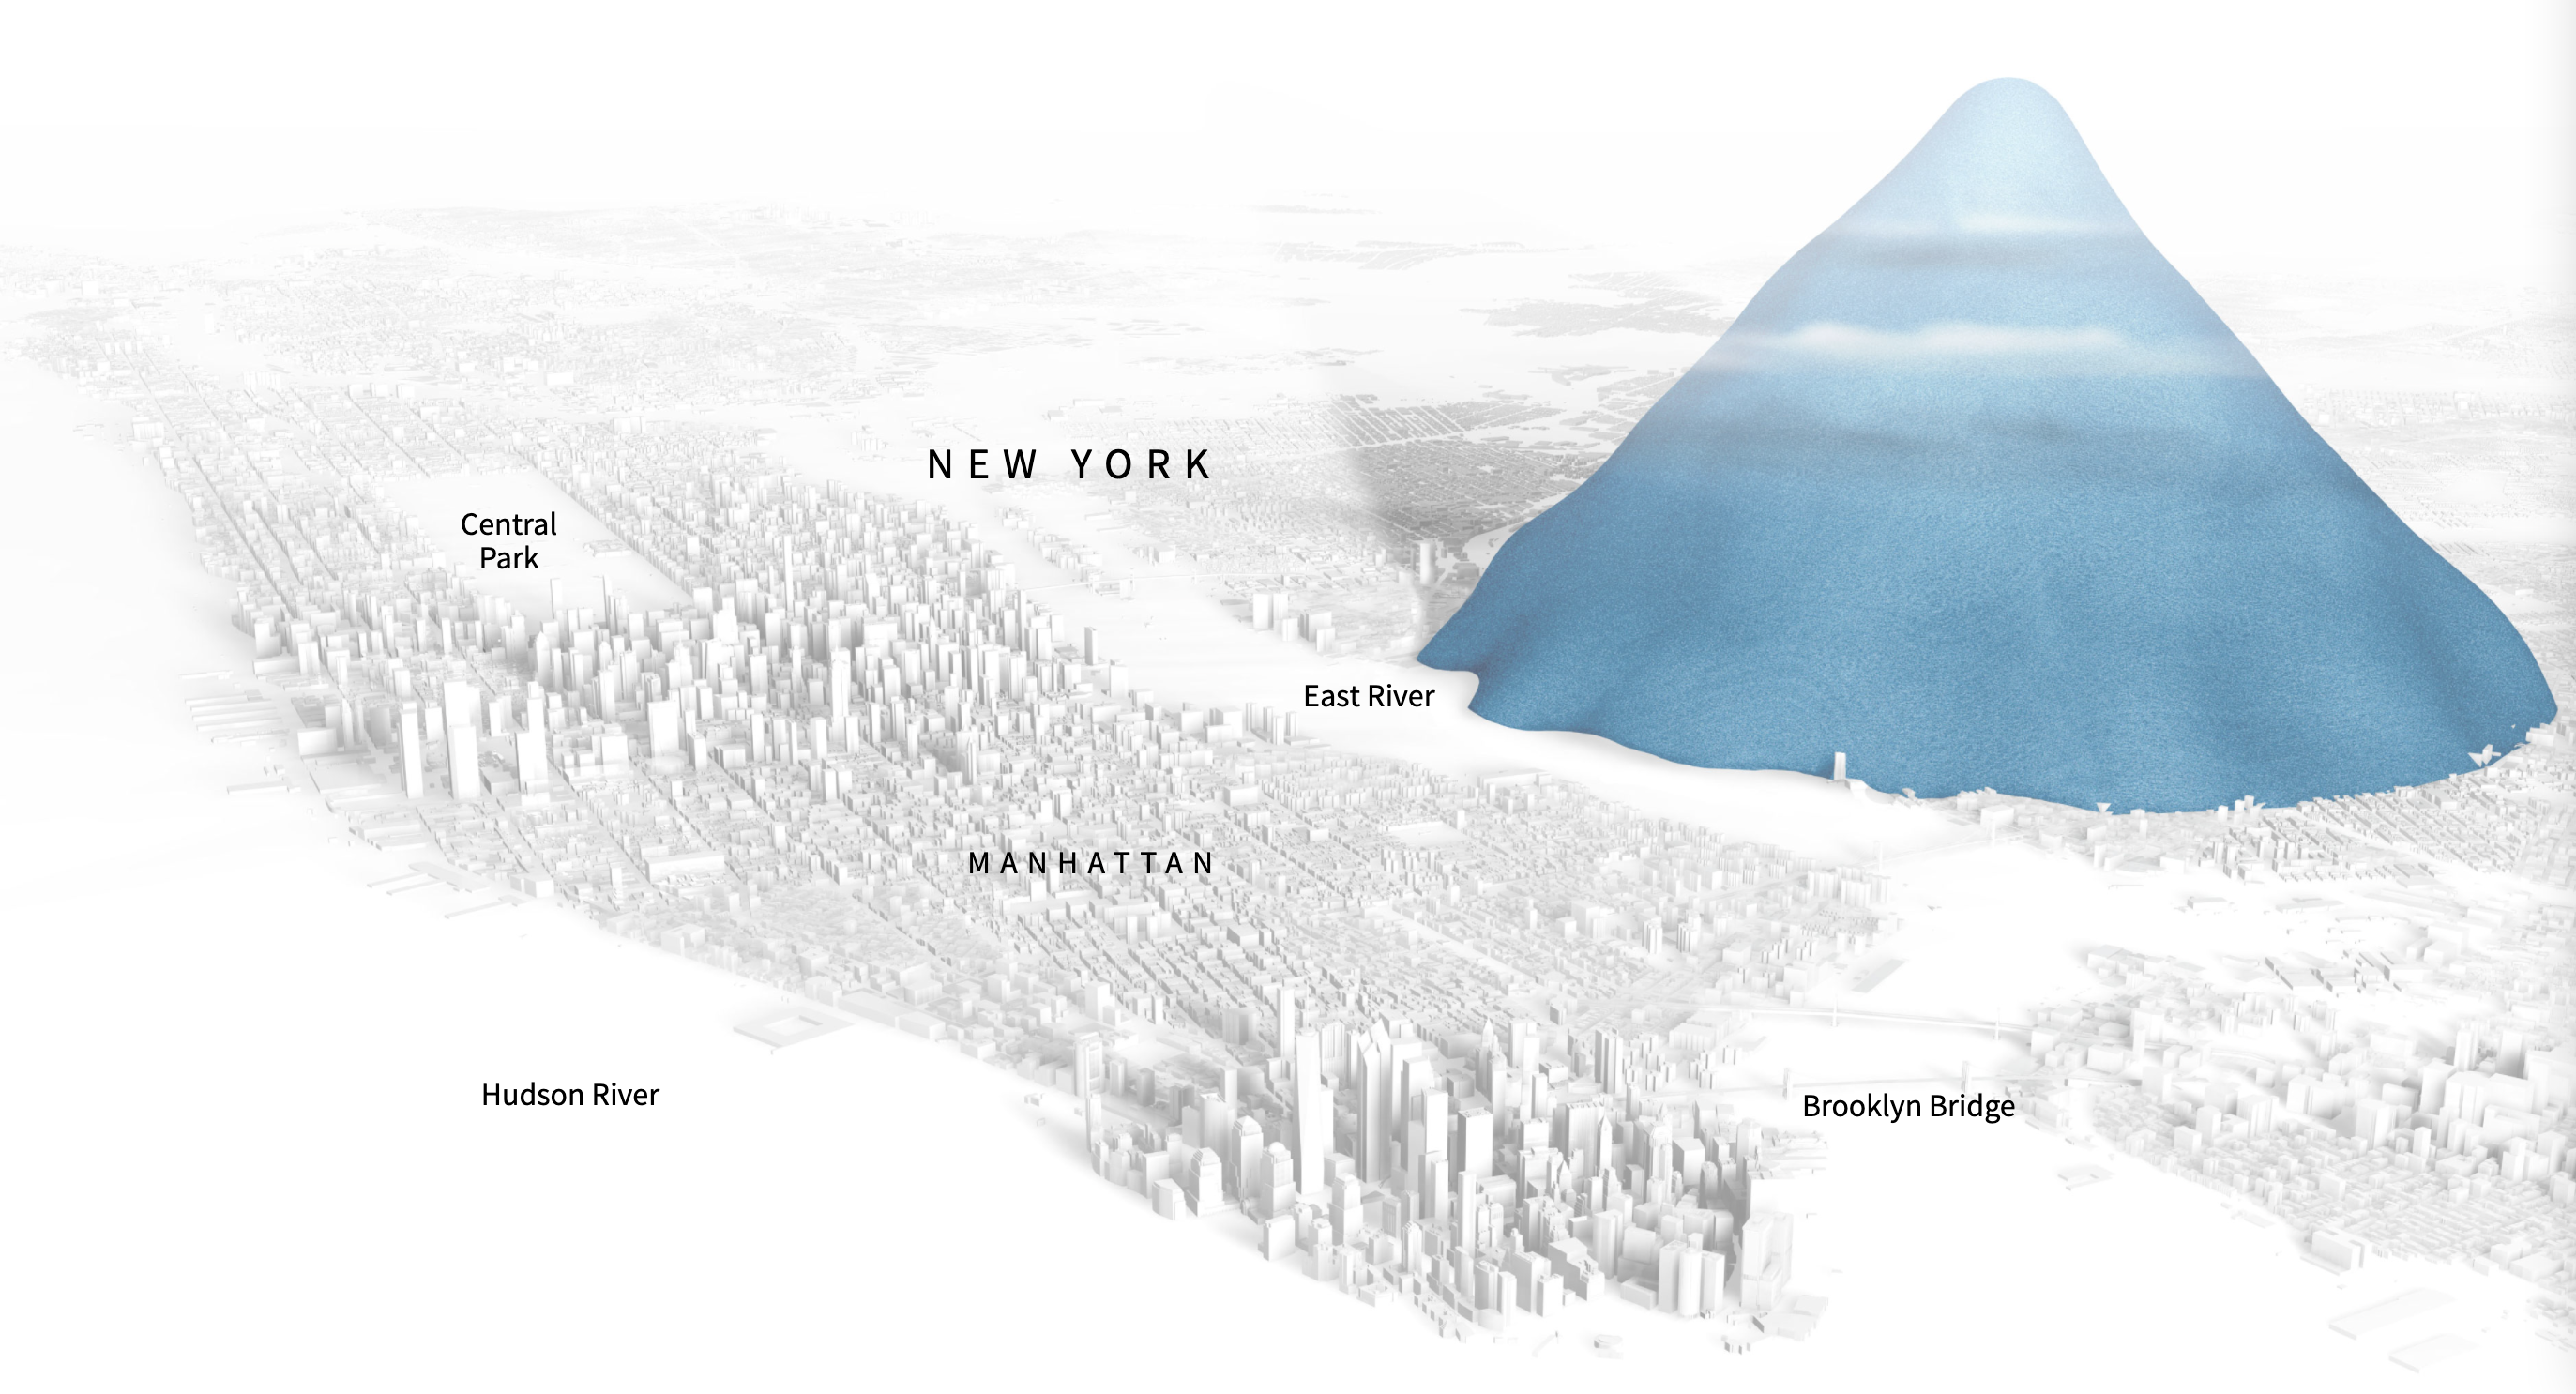 A mountain of plastic compared to the size of Manhattan